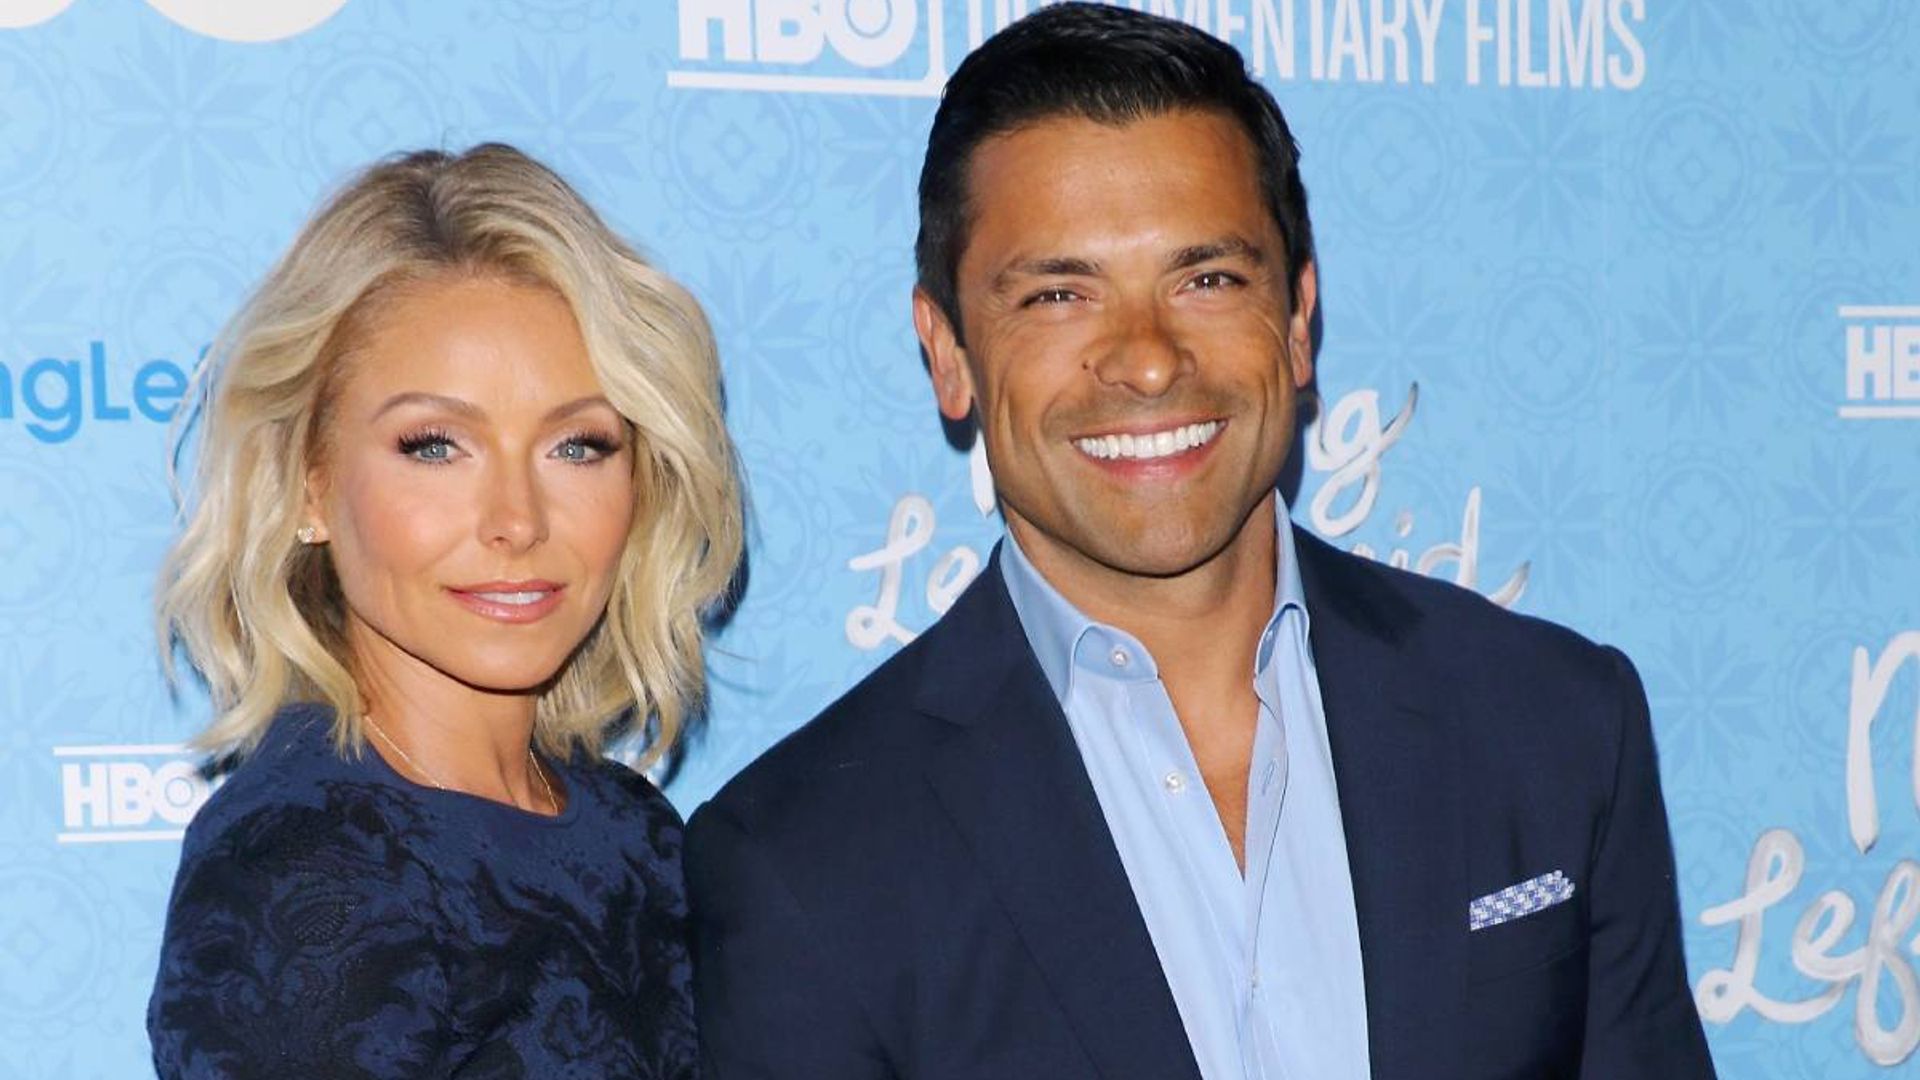 Kelly Ripa suffers injury during Labor Day celebrations with husband Mark Consuelos